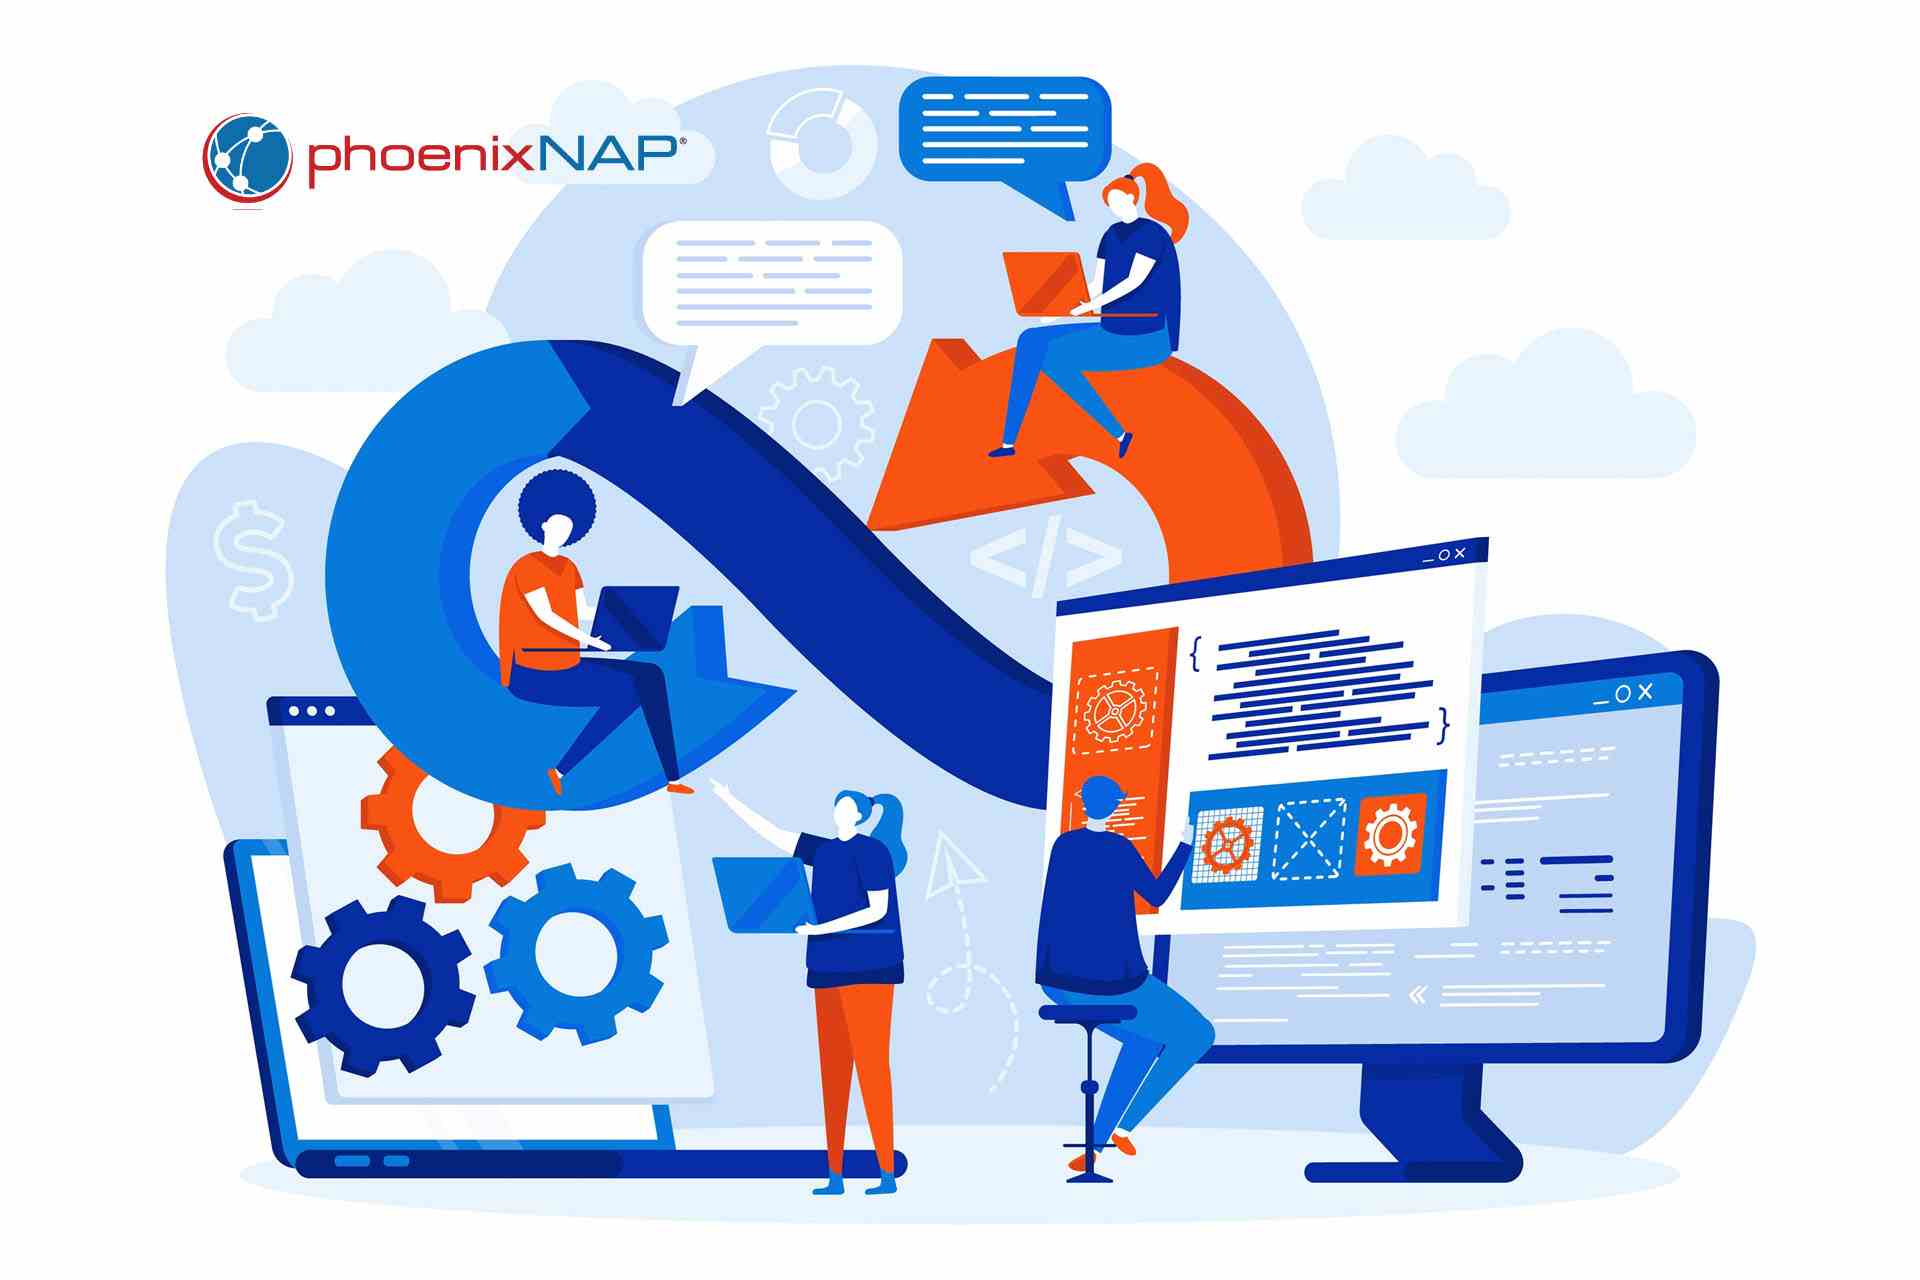 How phoenixNAP is giving back to the DevOps community.